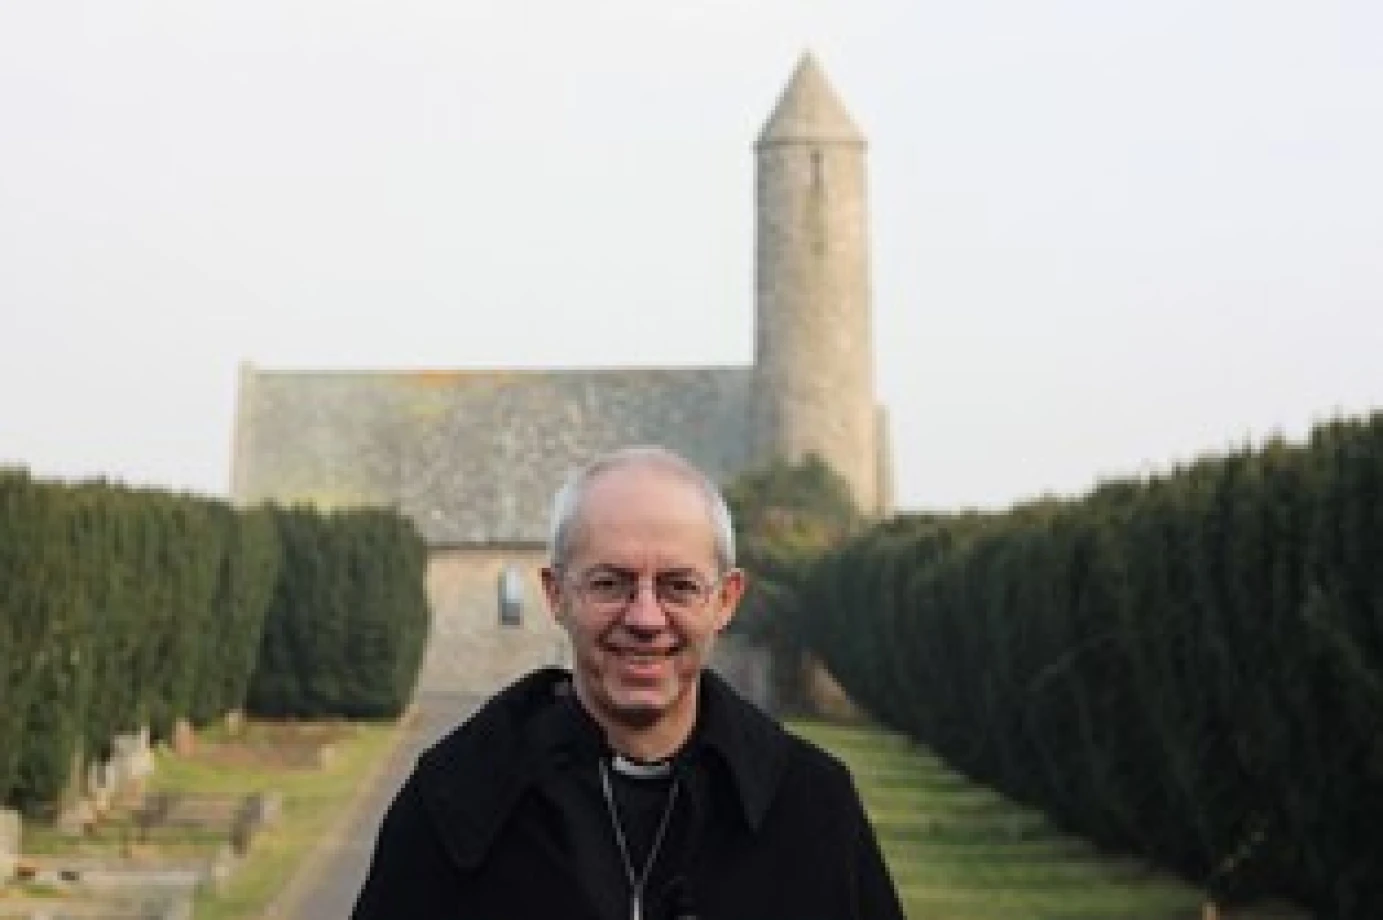 Diocese privileged to host historic visit by the Archbishop of Canterbury